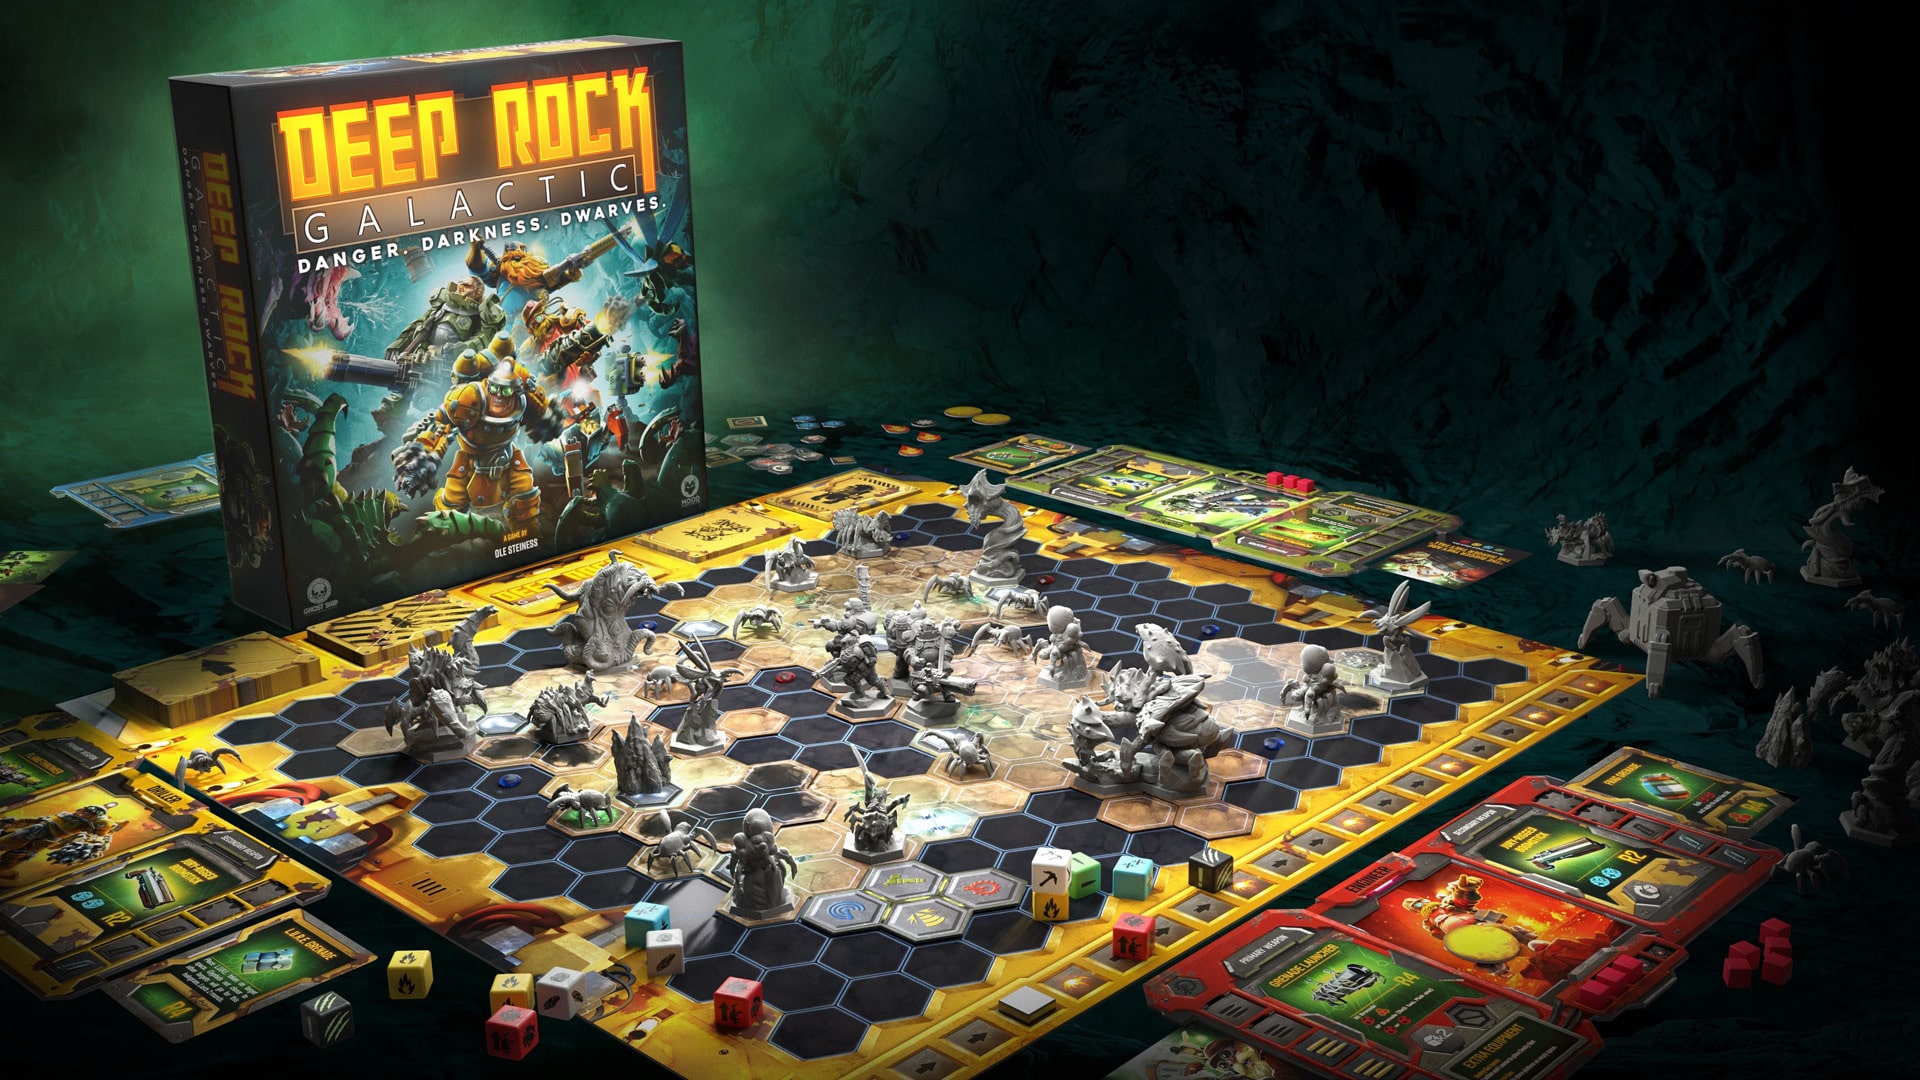 The engaging setup of Deep Rock Galactic board game, featuring space-themed elements and dynamic gameplay, appealing to sci-fi enthusiasts.